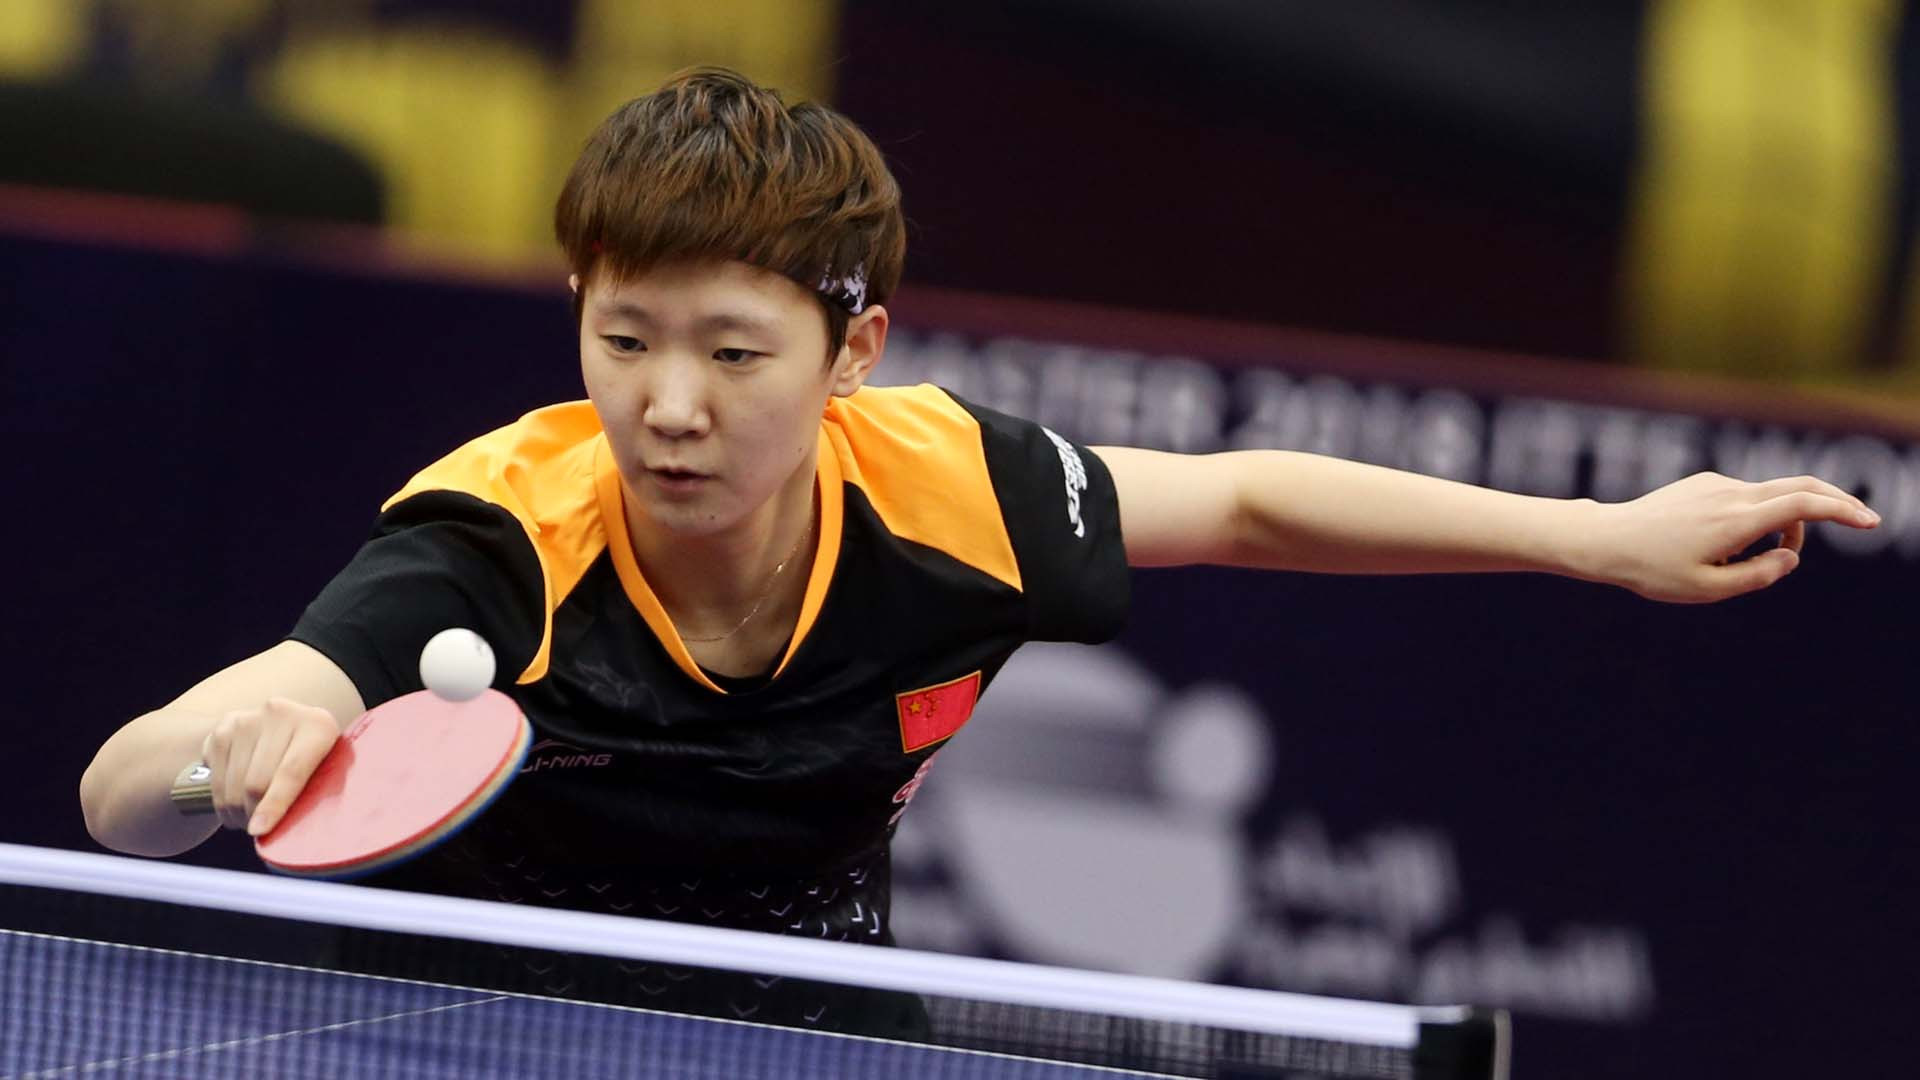 China's Wang Manyu faces compatriot and world number one Chen Meng in the women's semi-finals of the ITTF Qatar Open - but she is confident she can win ©ITTF